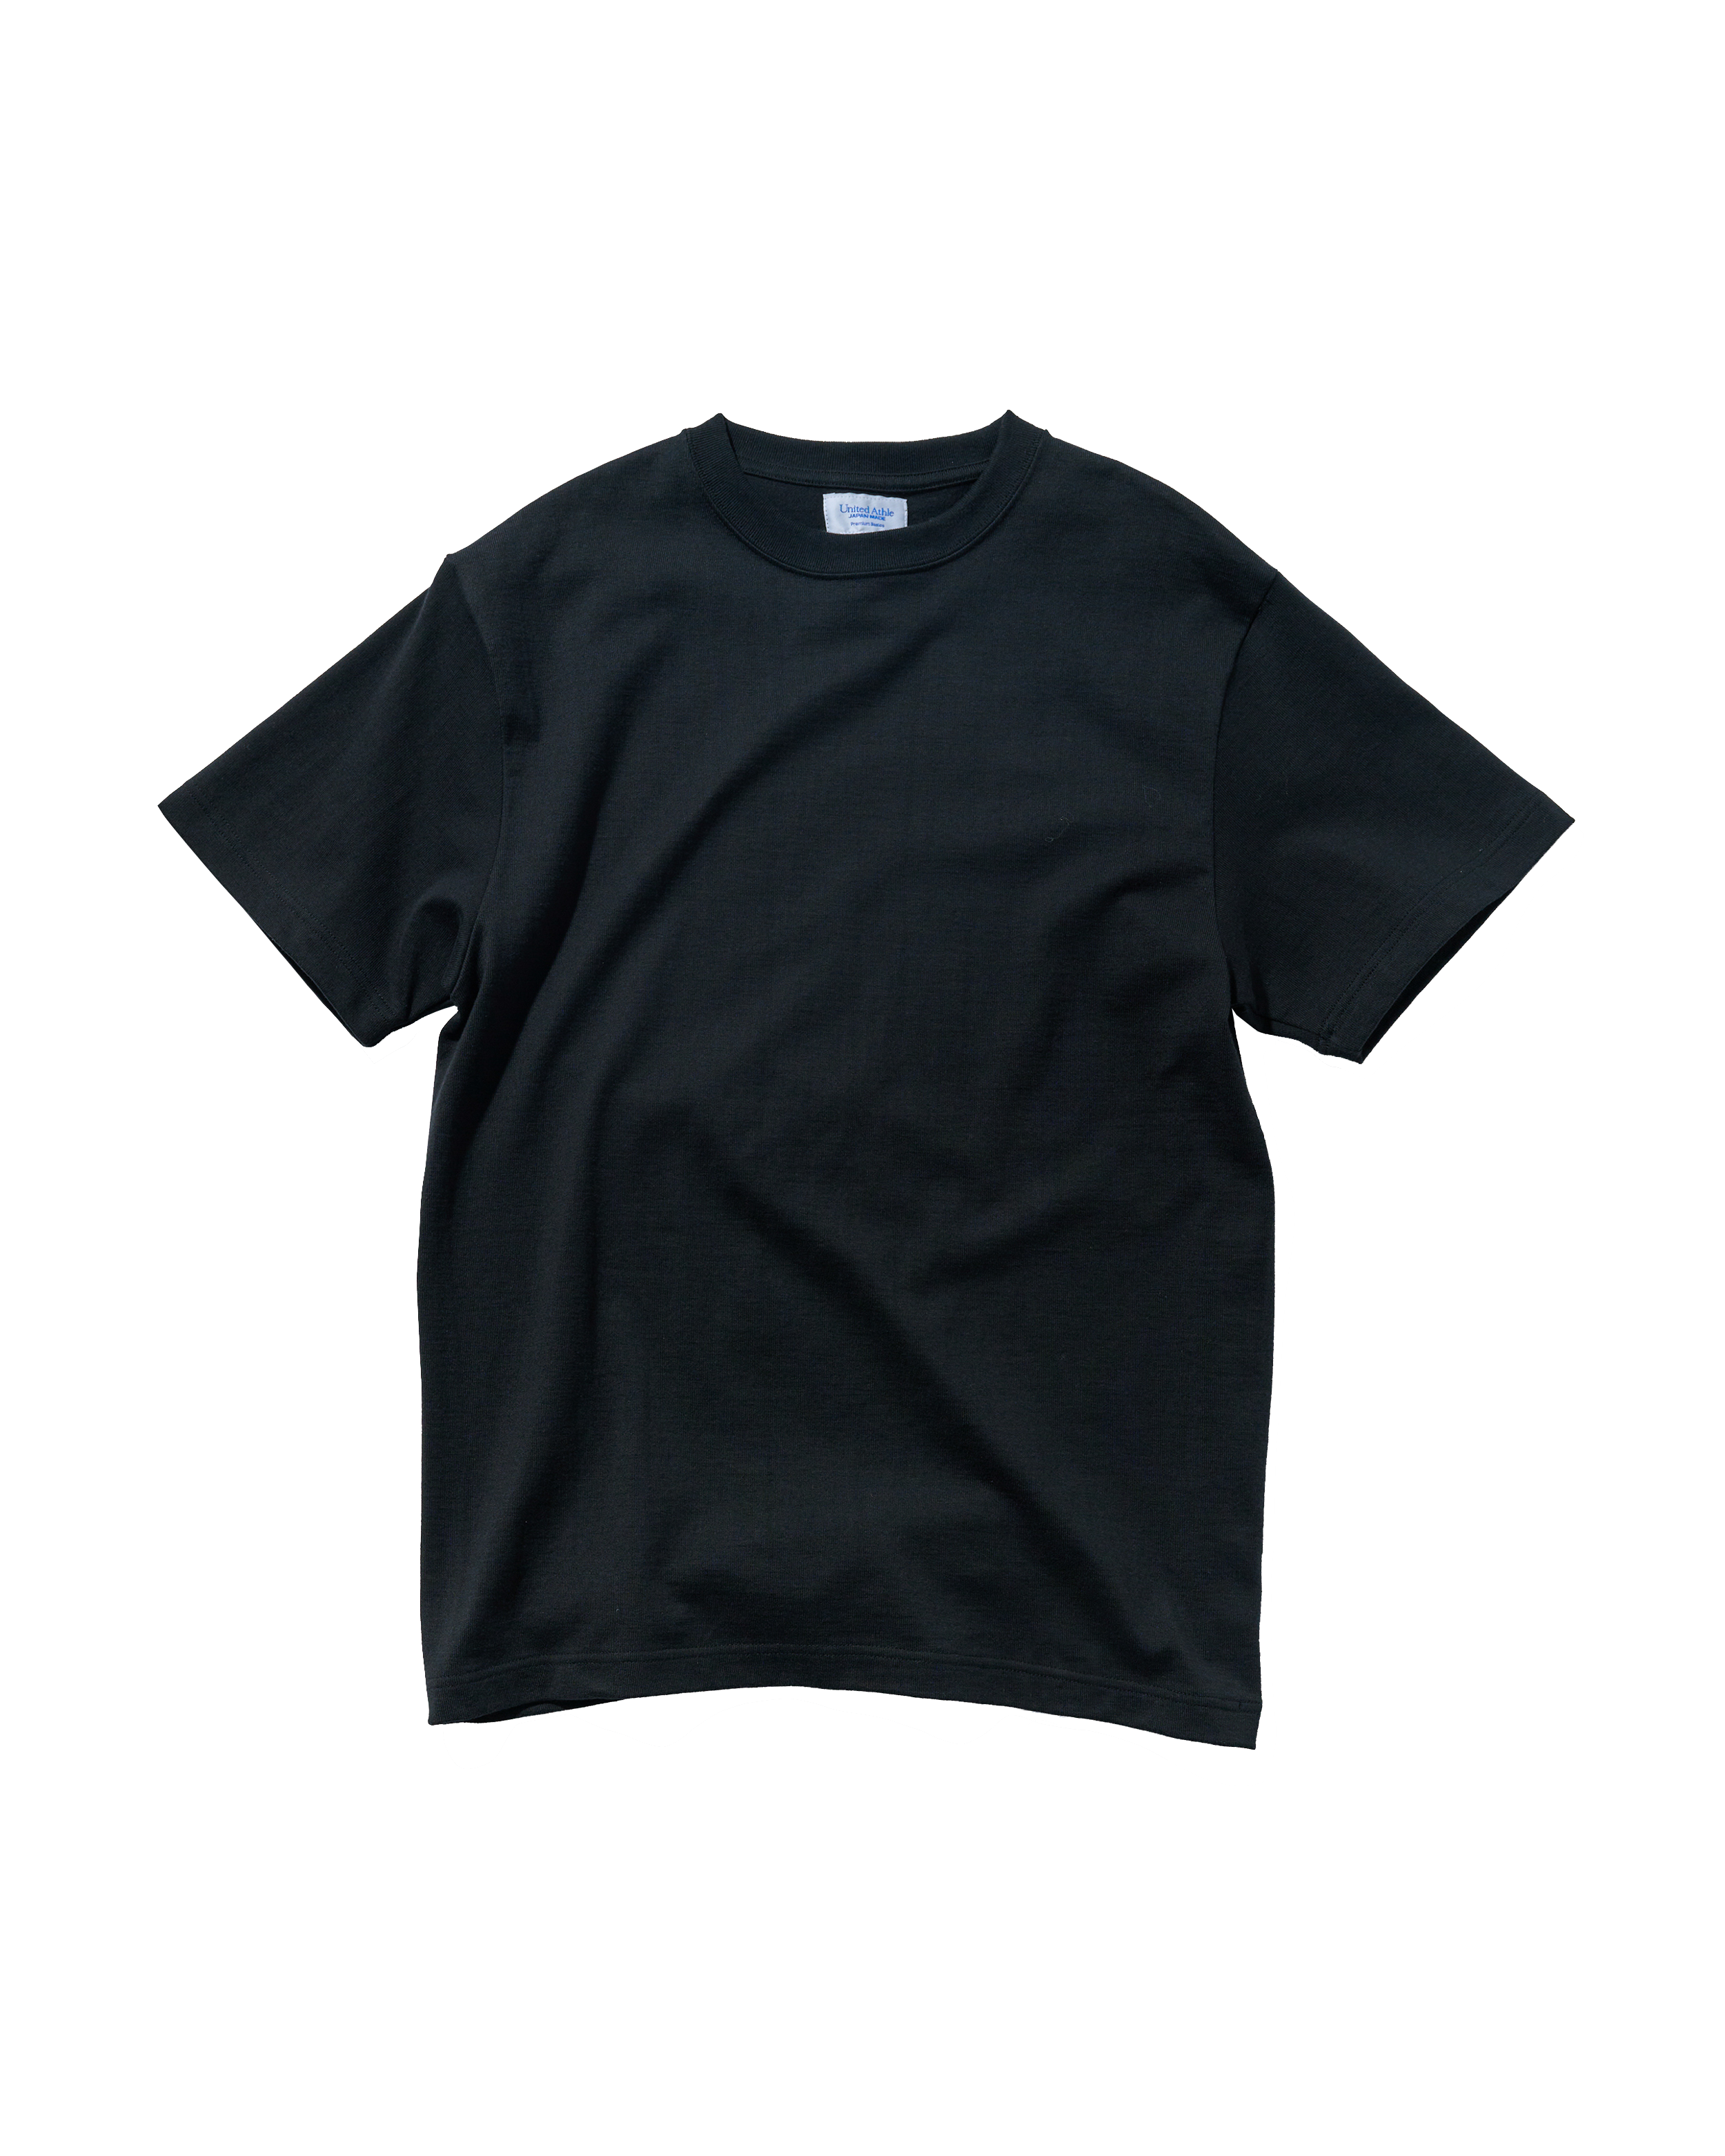 80003 - Japan Made - Wide Fit T-shirt - Black x 1